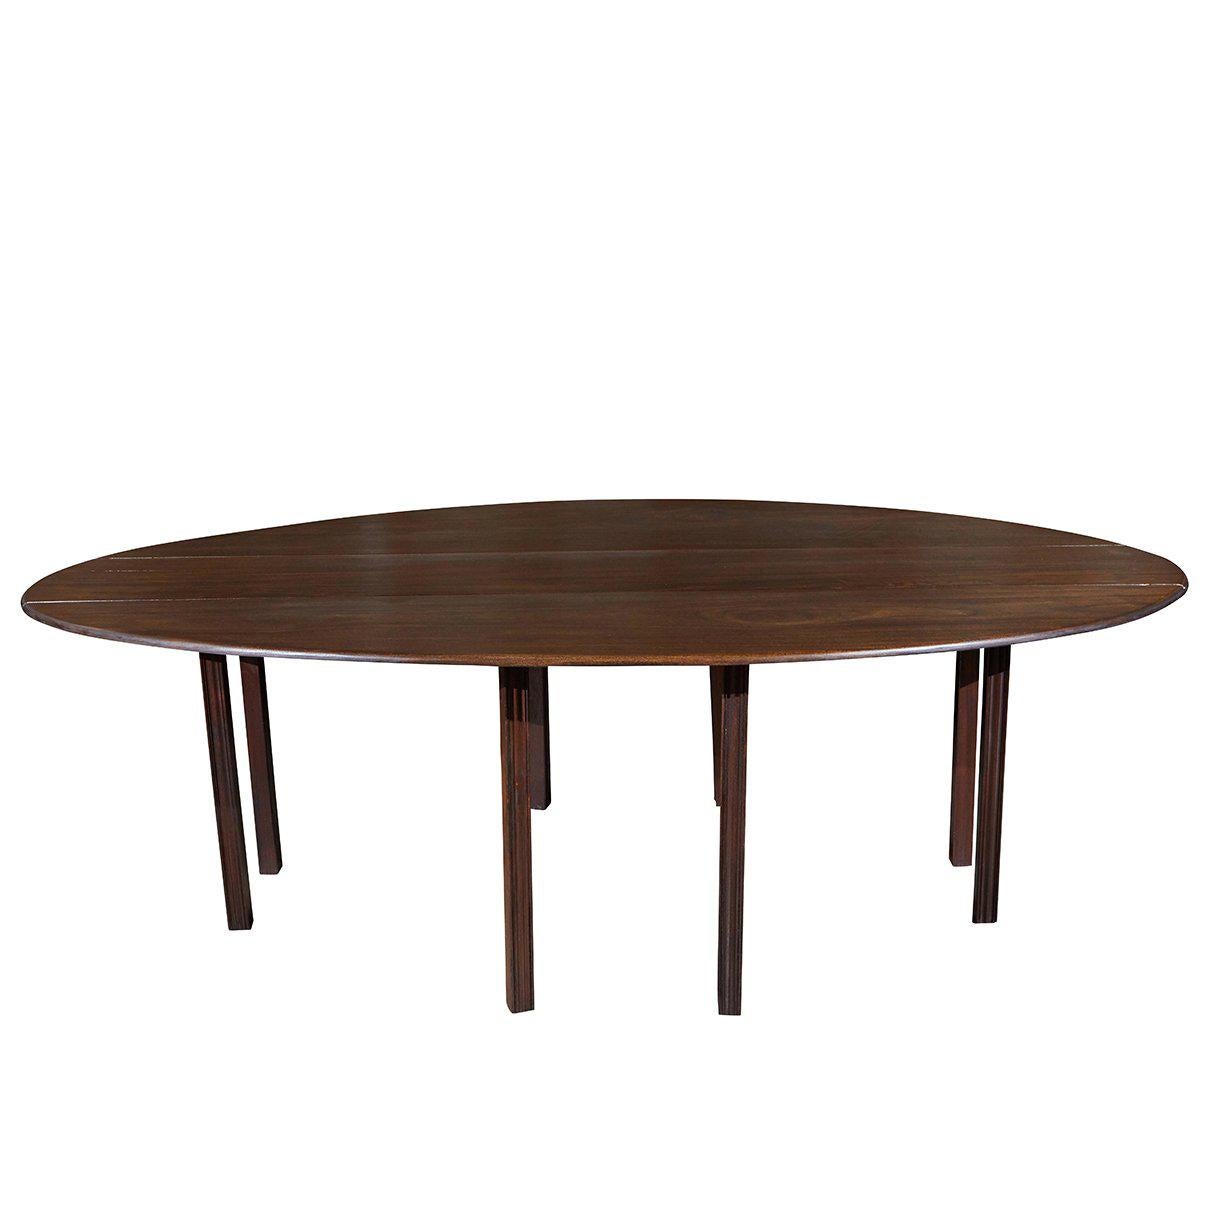 English Drop-Leaf Oval Dining Table